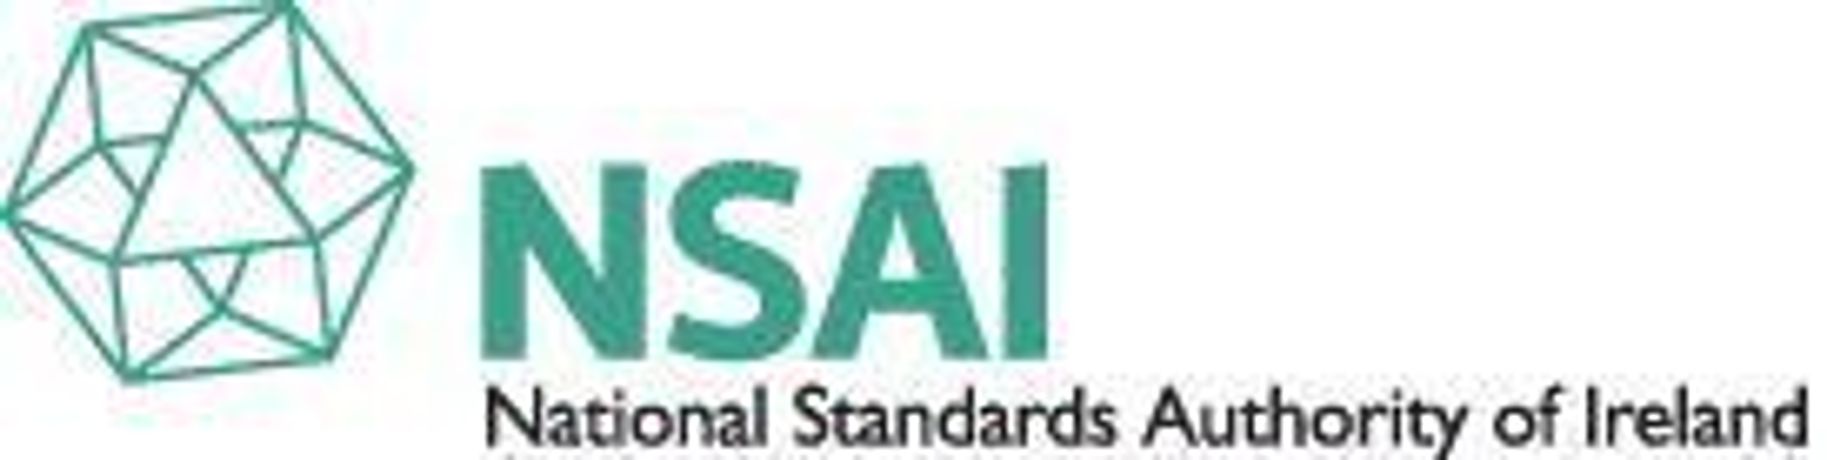 ISO 14001 Certification from NSAI – The International Standard for Environmental Systems Management